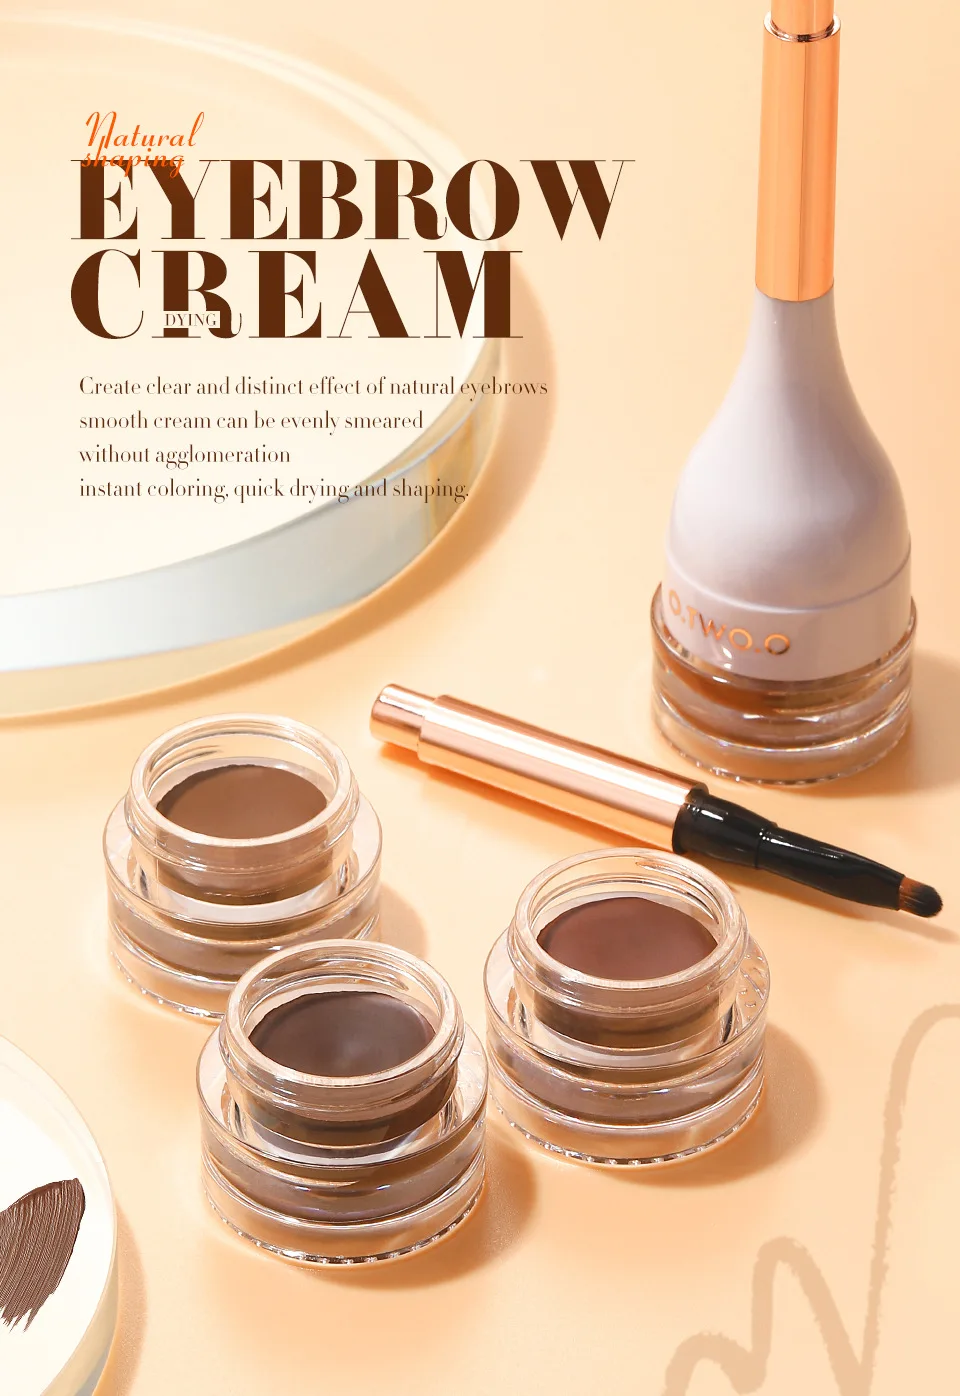 Natural Shaping Eyebrow Dyeing Cream Is Not Easy To Fade. Eyebrow Dyeing Cream 4-color Makeup Cosmetics  Makeup  Brows